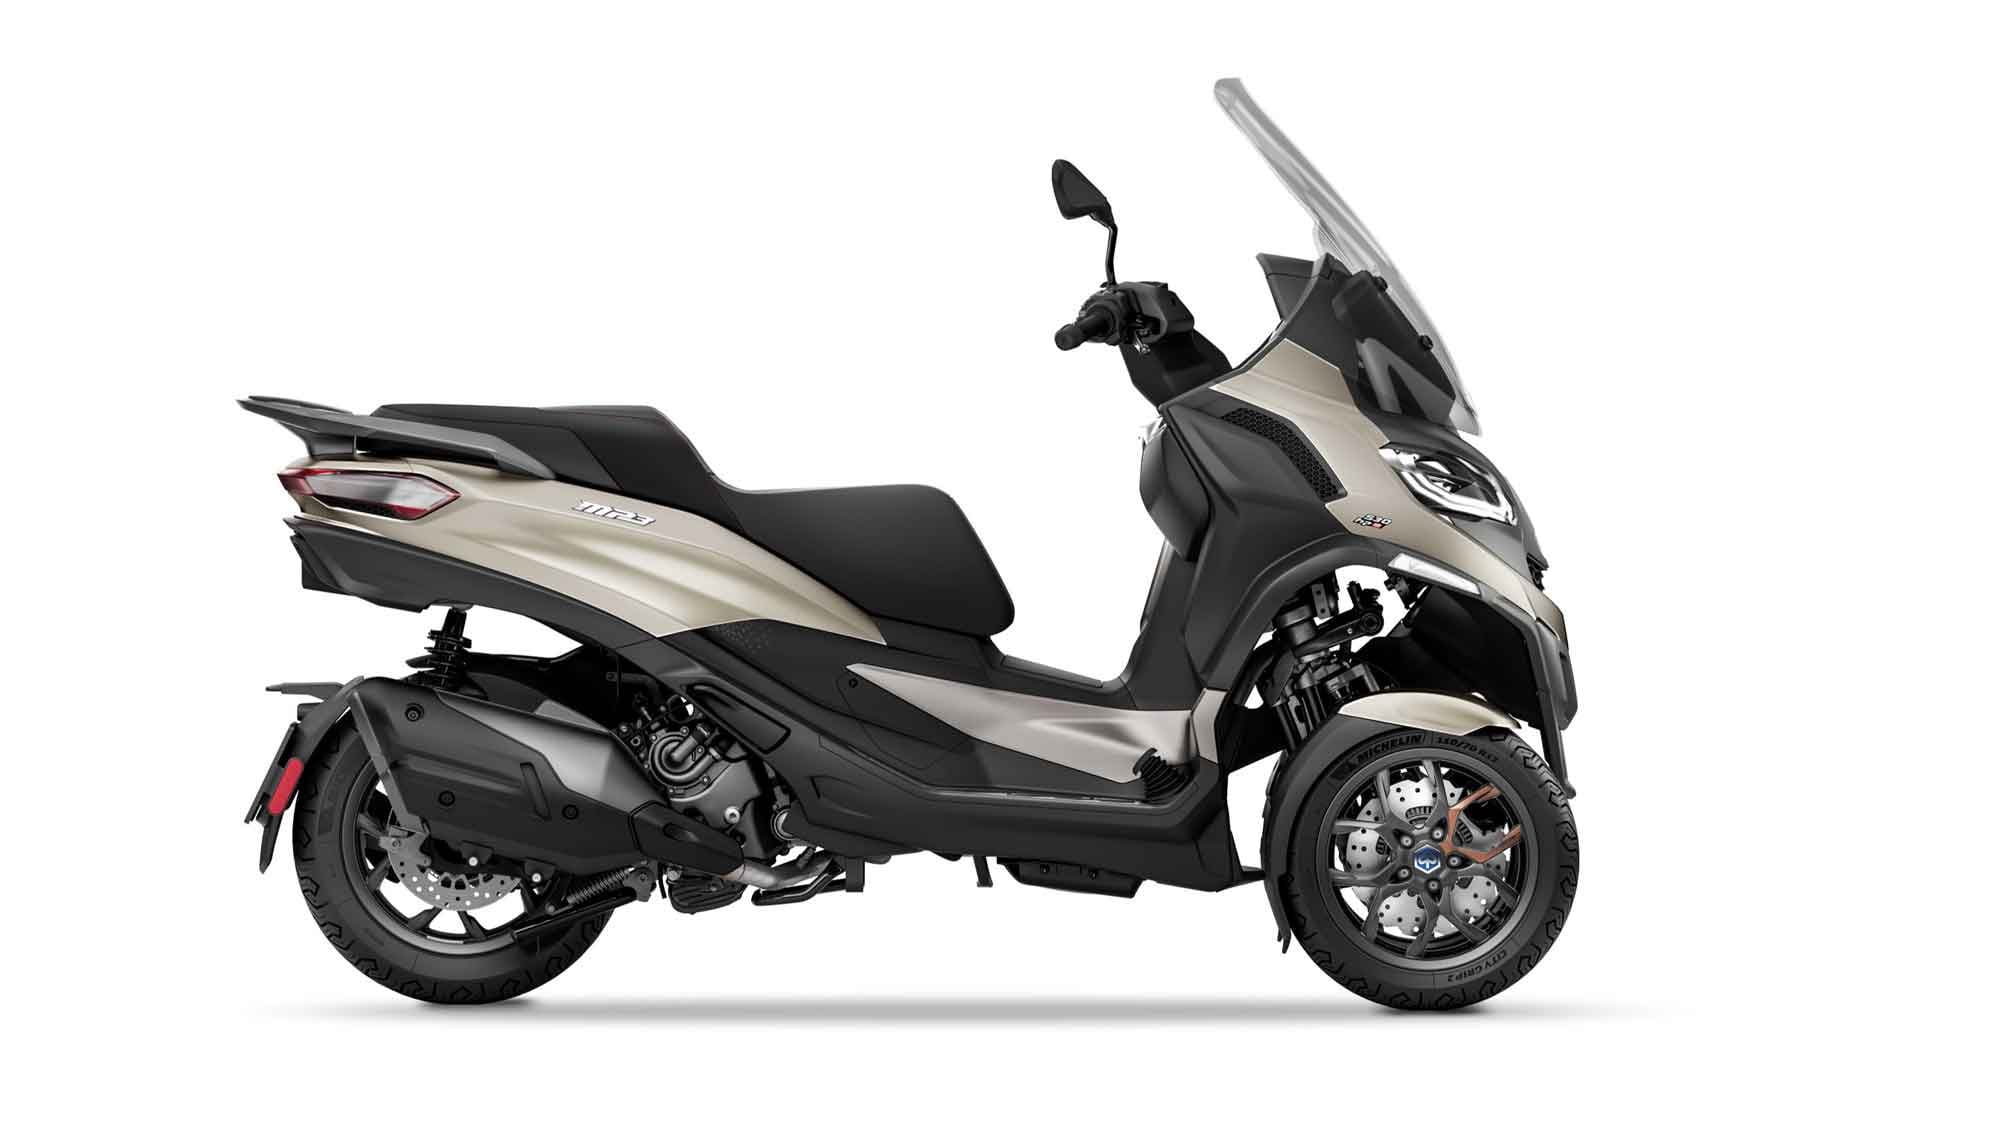 The MP3′s front suspension is a combination of scooter, motorcycle, automobile, and pure innovation. Picking a line is different than with a conventional two-wheeler, but the front-end security—especially on poor surfaces—is admirable.